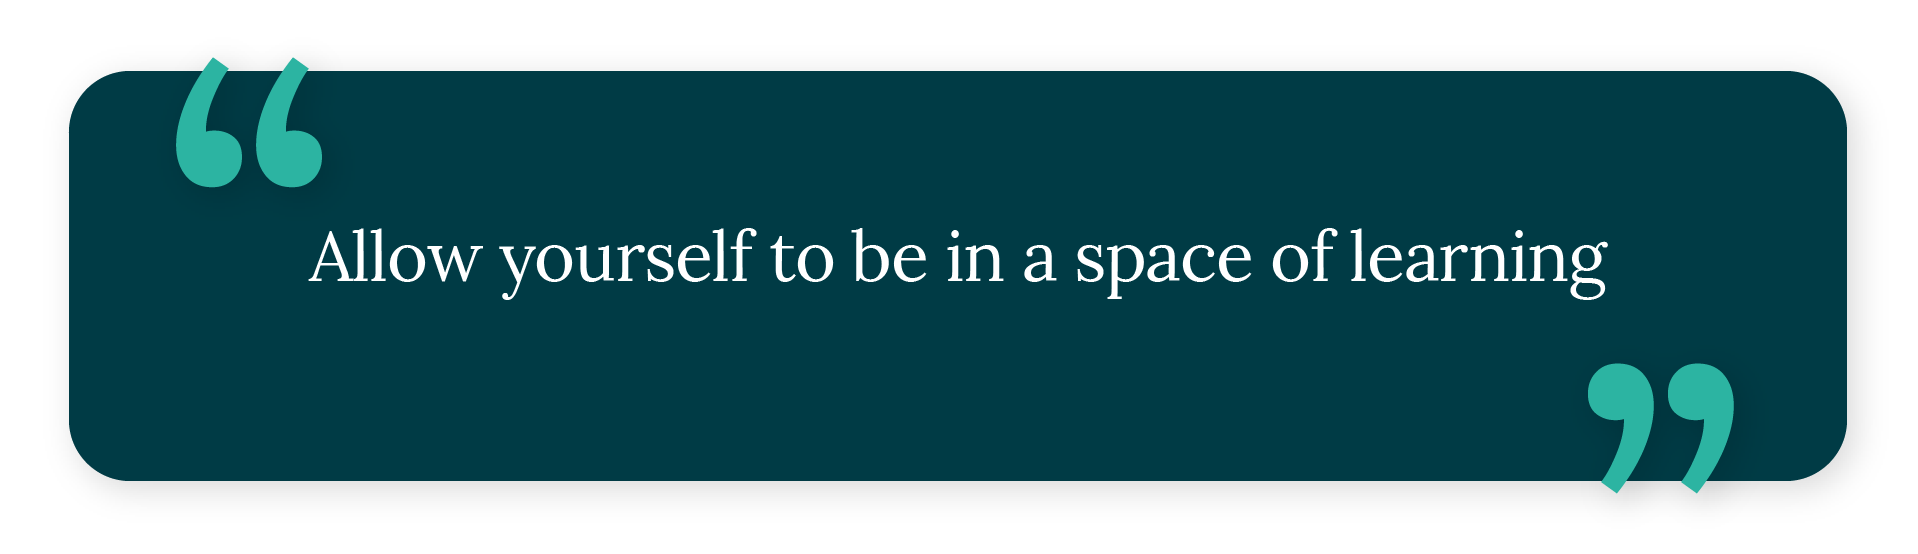 Allow yourself to be in a space of learning